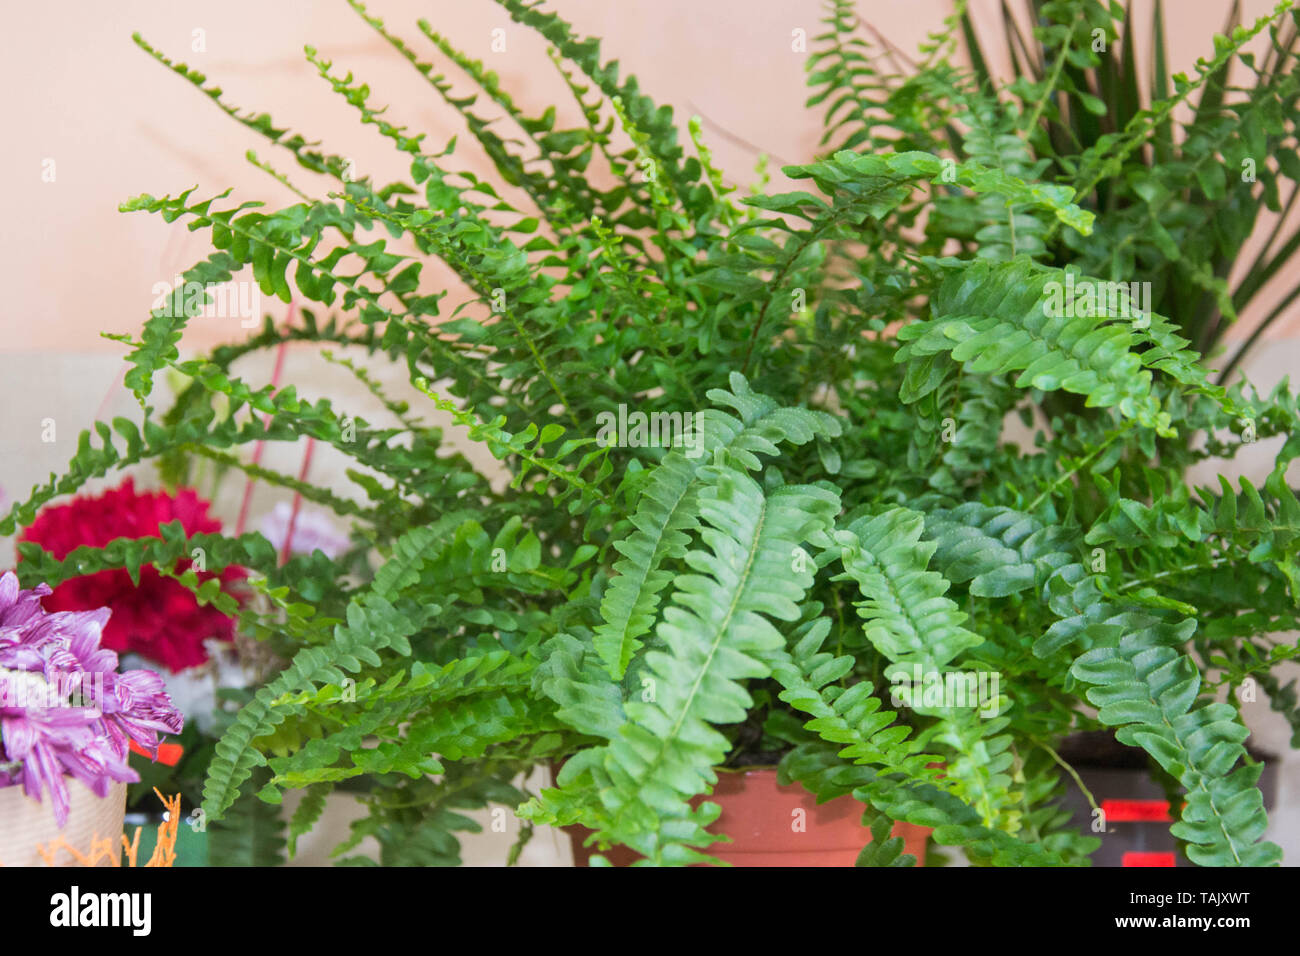 Nephrolepis exaltata - The Sword Fern - Big green leaves of fern in a pot in flower shop, greenhouse. Tropical forest plant Stock Photo